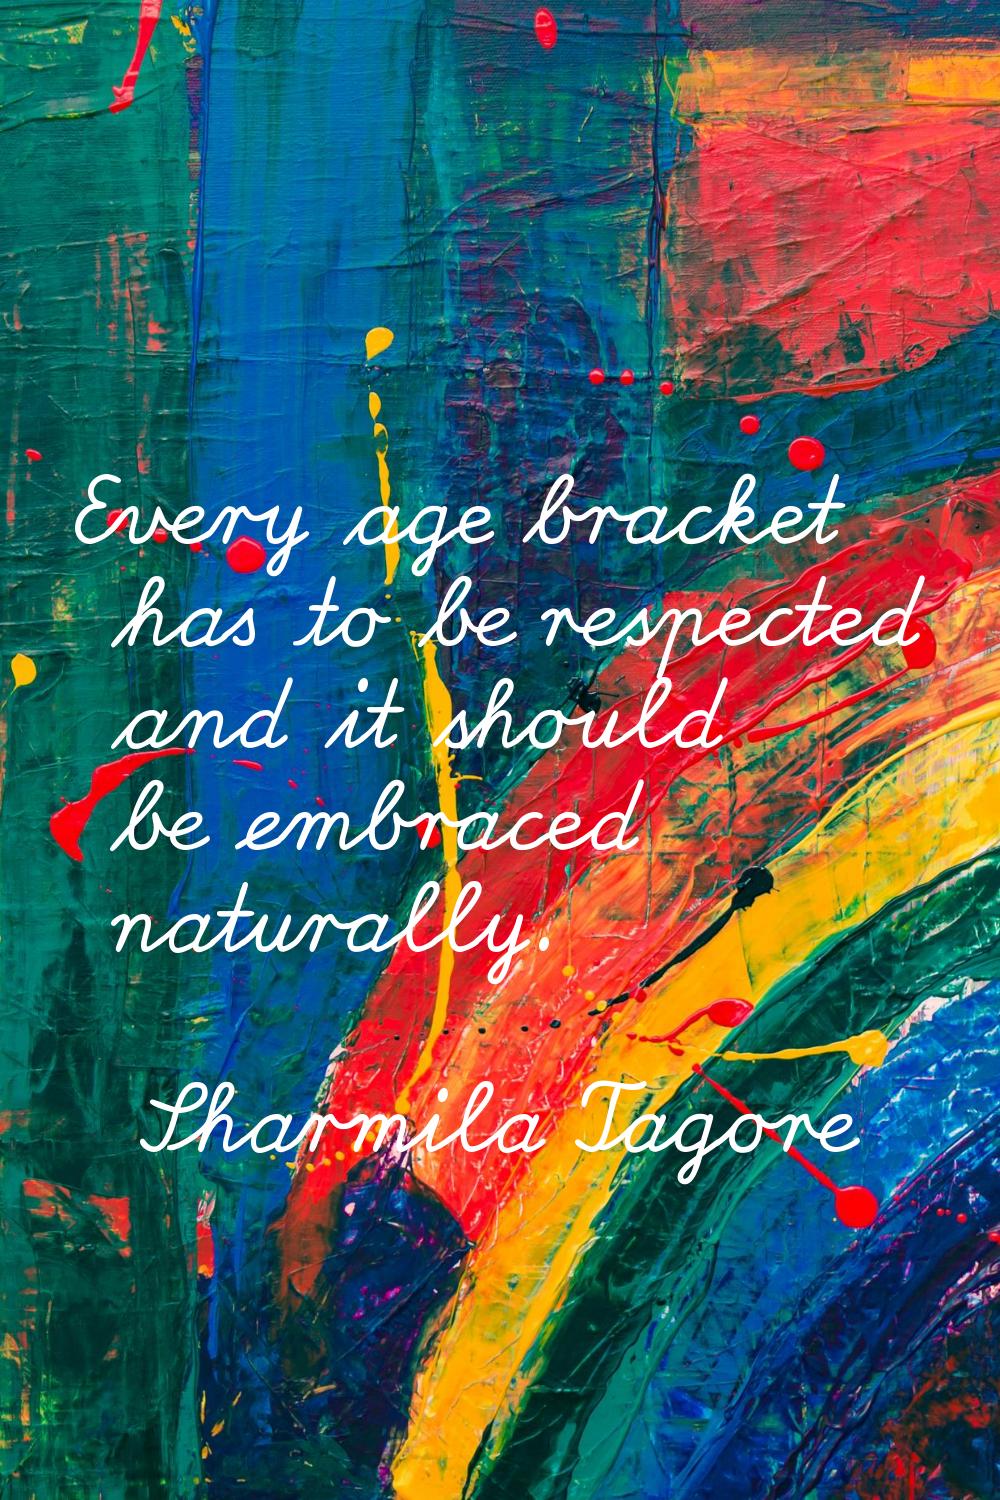 Every age bracket has to be respected and it should be embraced naturally.